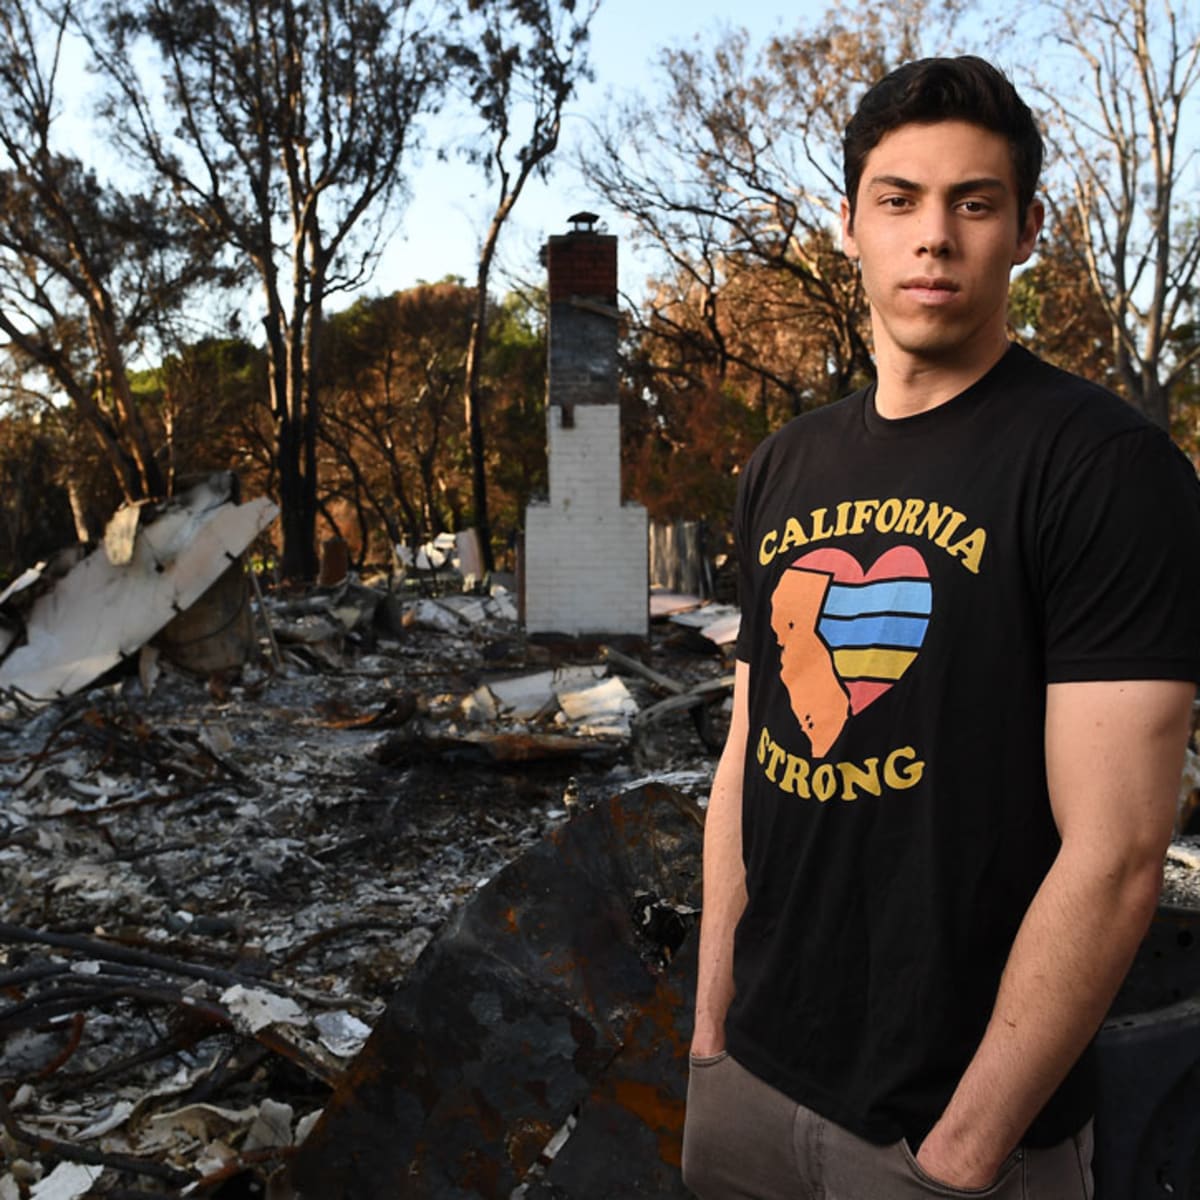 How Christian Yelich helped California heal during the fires